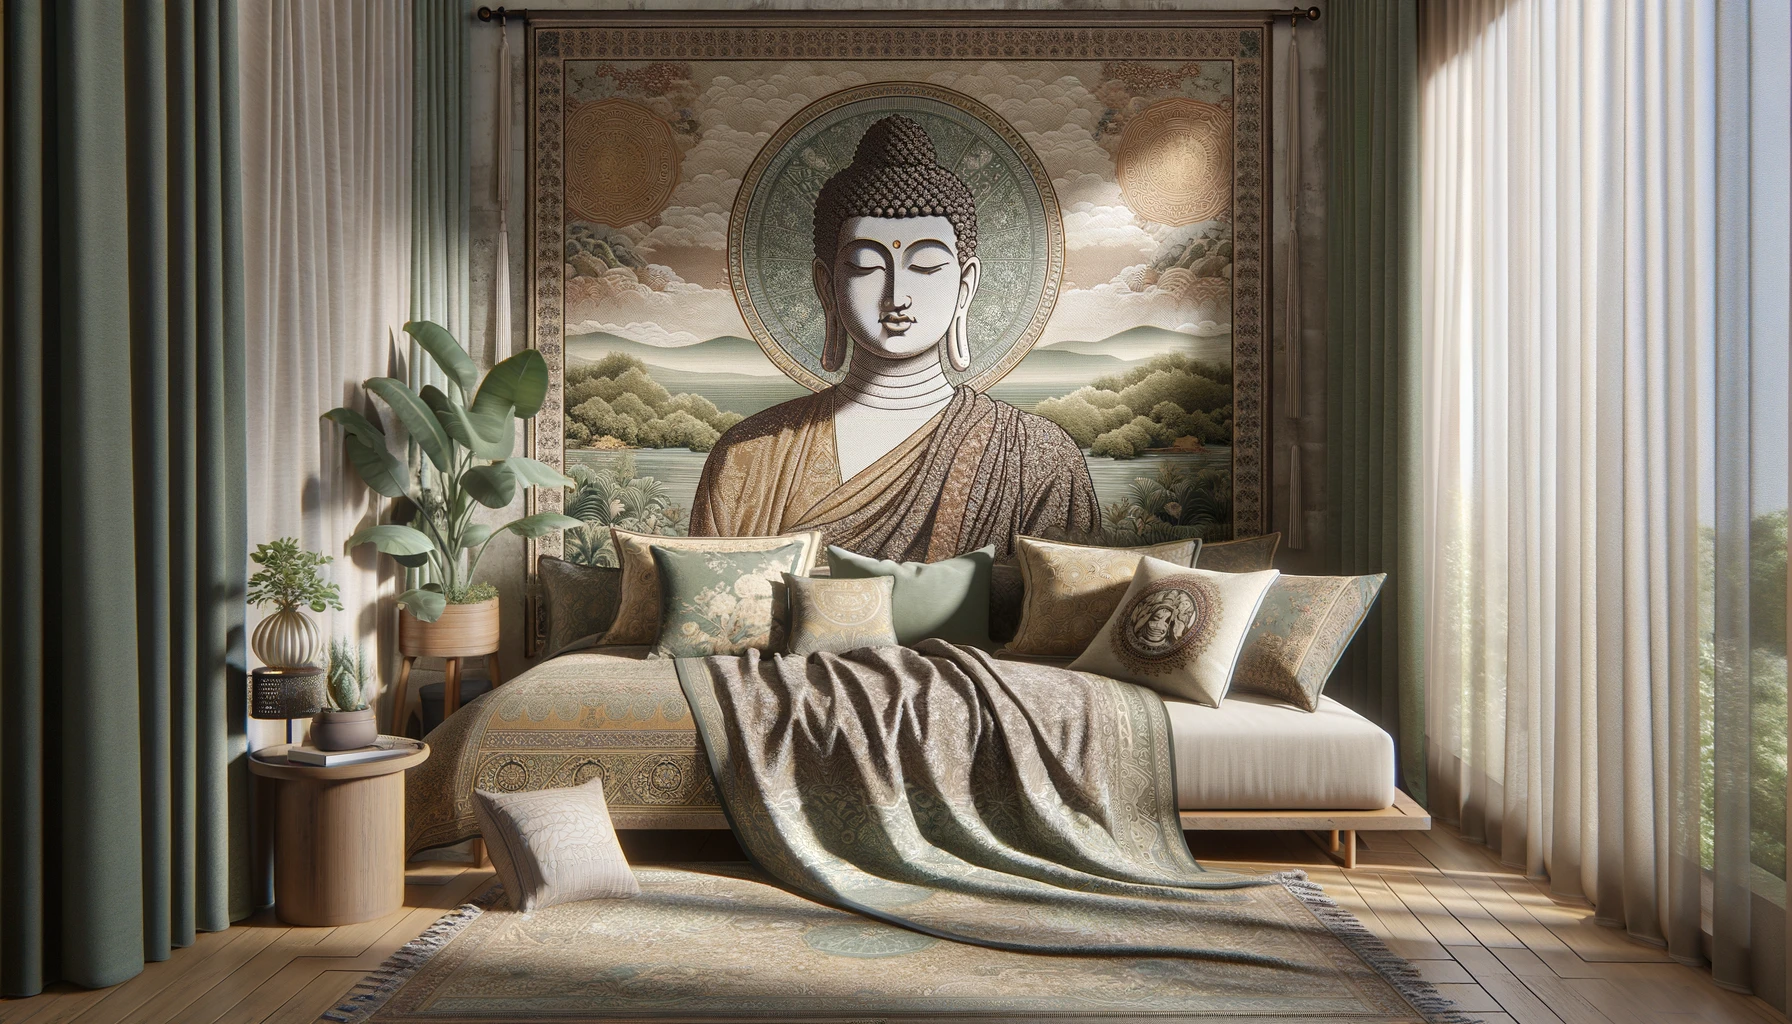 An elegantly decorated room showcasing Buddha home textiles. The scene includes a detailed tapestry with a Buddha motif hanging on the wall, complemented by matching throw pillows and a bedspread on a nearby daybed. The room features earthy tones and subtle greenery, enhancing the peaceful ambiance. Natural light streams through sheer curtains, casting soft shadows. This landscape-oriented image is designed to depict a tranquil and harmonious living space, perfect for relaxation and reflection.